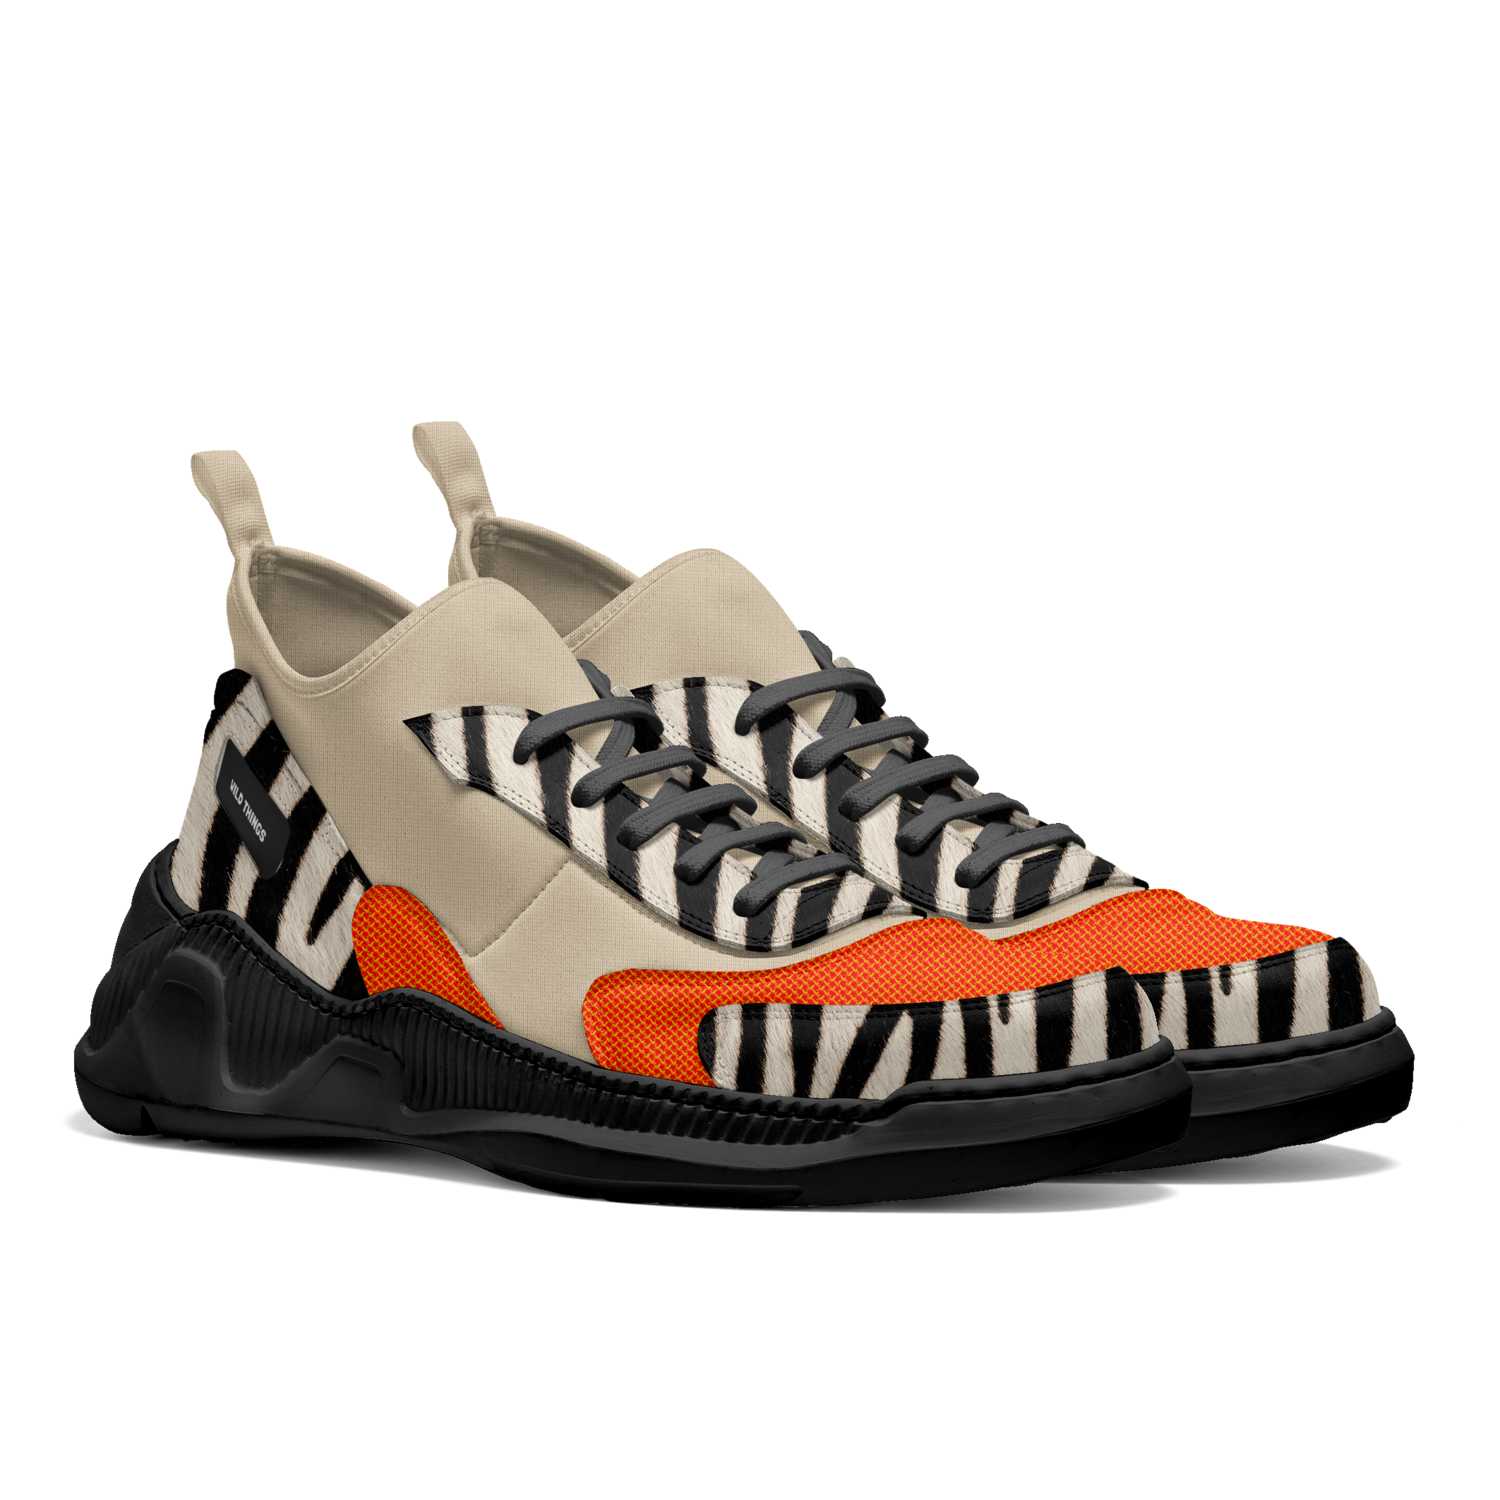 Wild Things | A Custom Shoe concept by Michael Henry